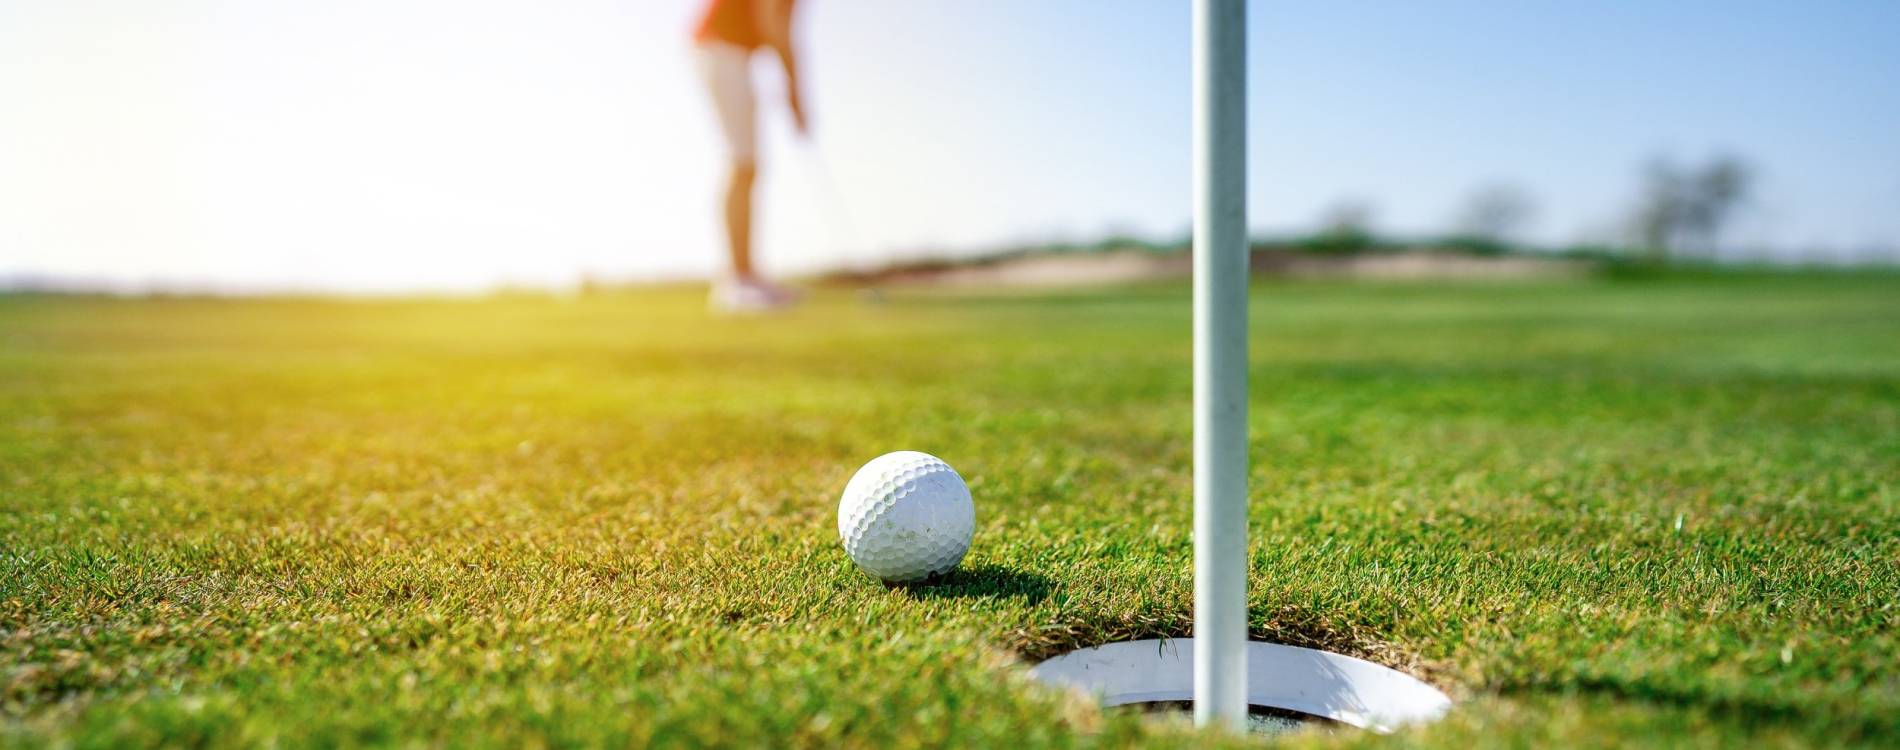 Golf: Italian Open to be played at Cervia next June 27-30 - Sports 